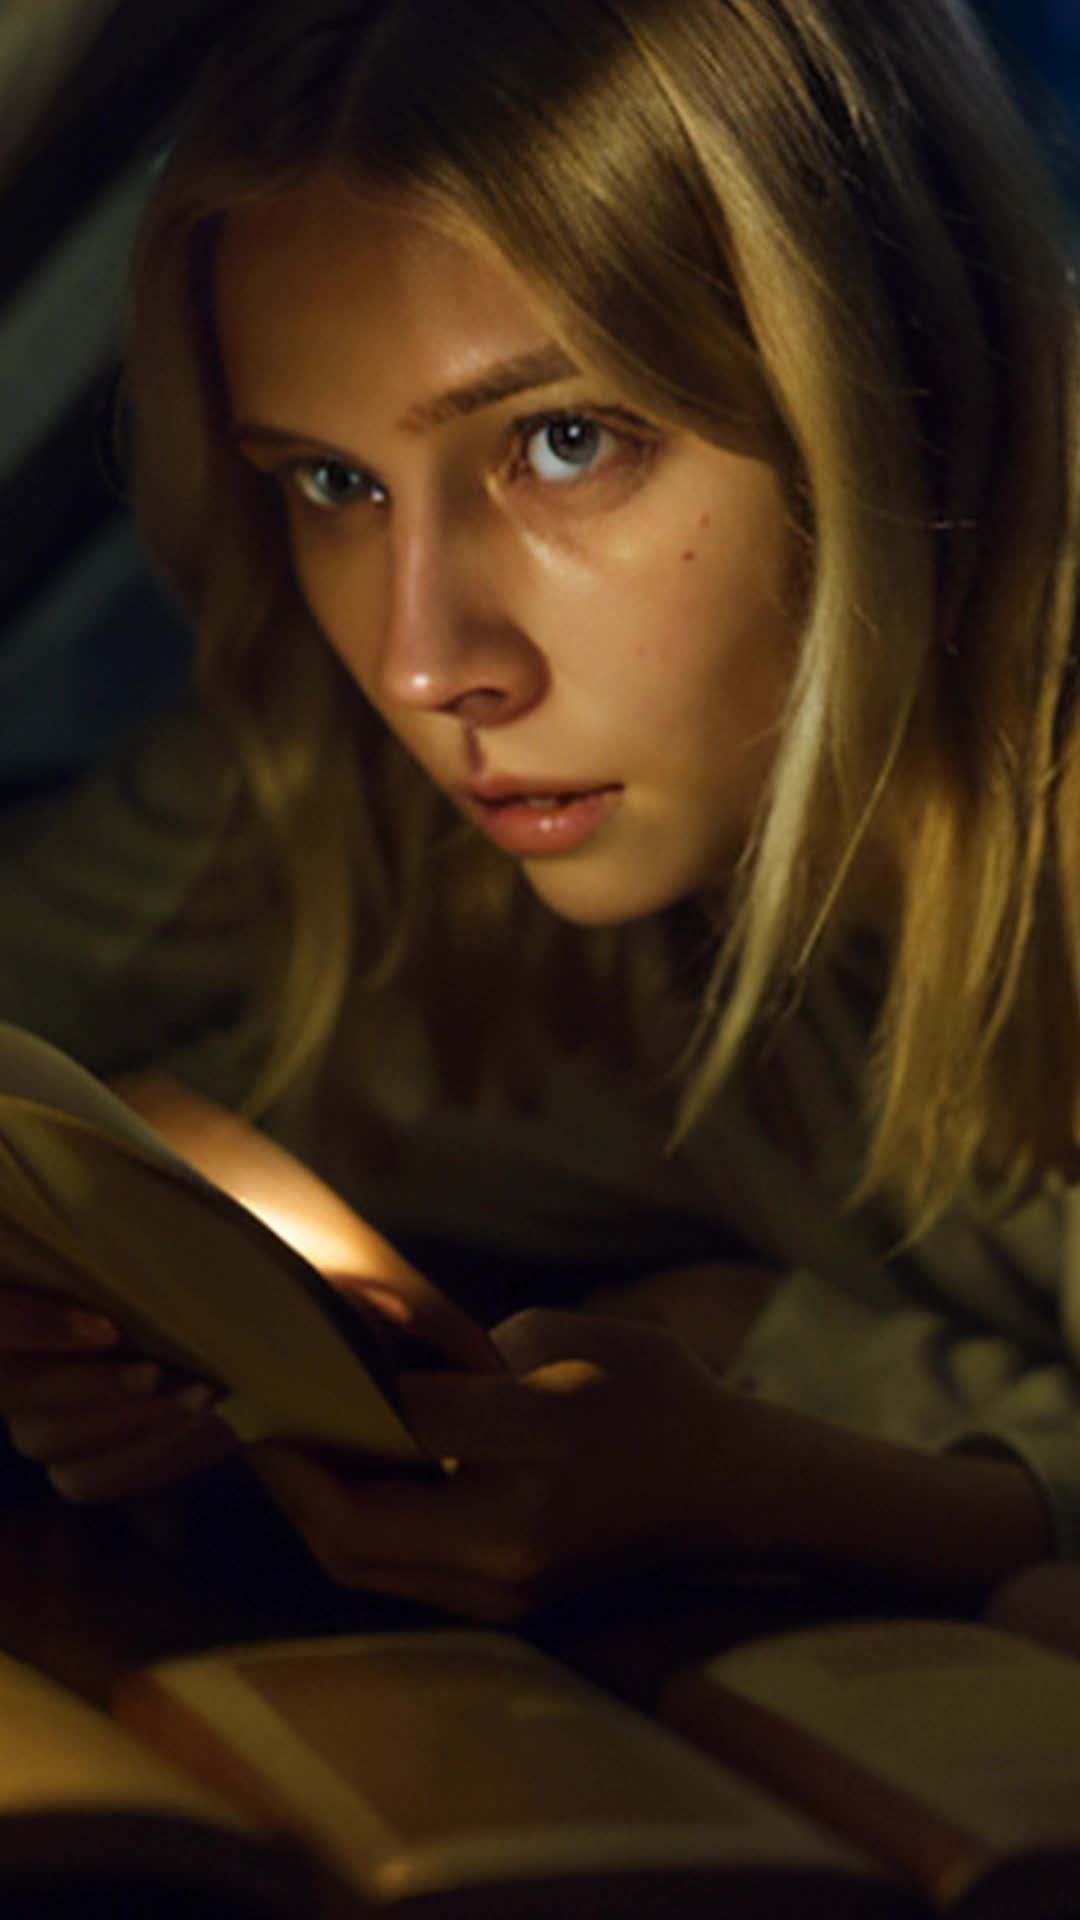 Curious blonde-haired girl, grabs flashlight, stealthily continues reading under covers, dimly lit adventure, soft glow illuminating her eager face, night-time, thrill of forbidden reading